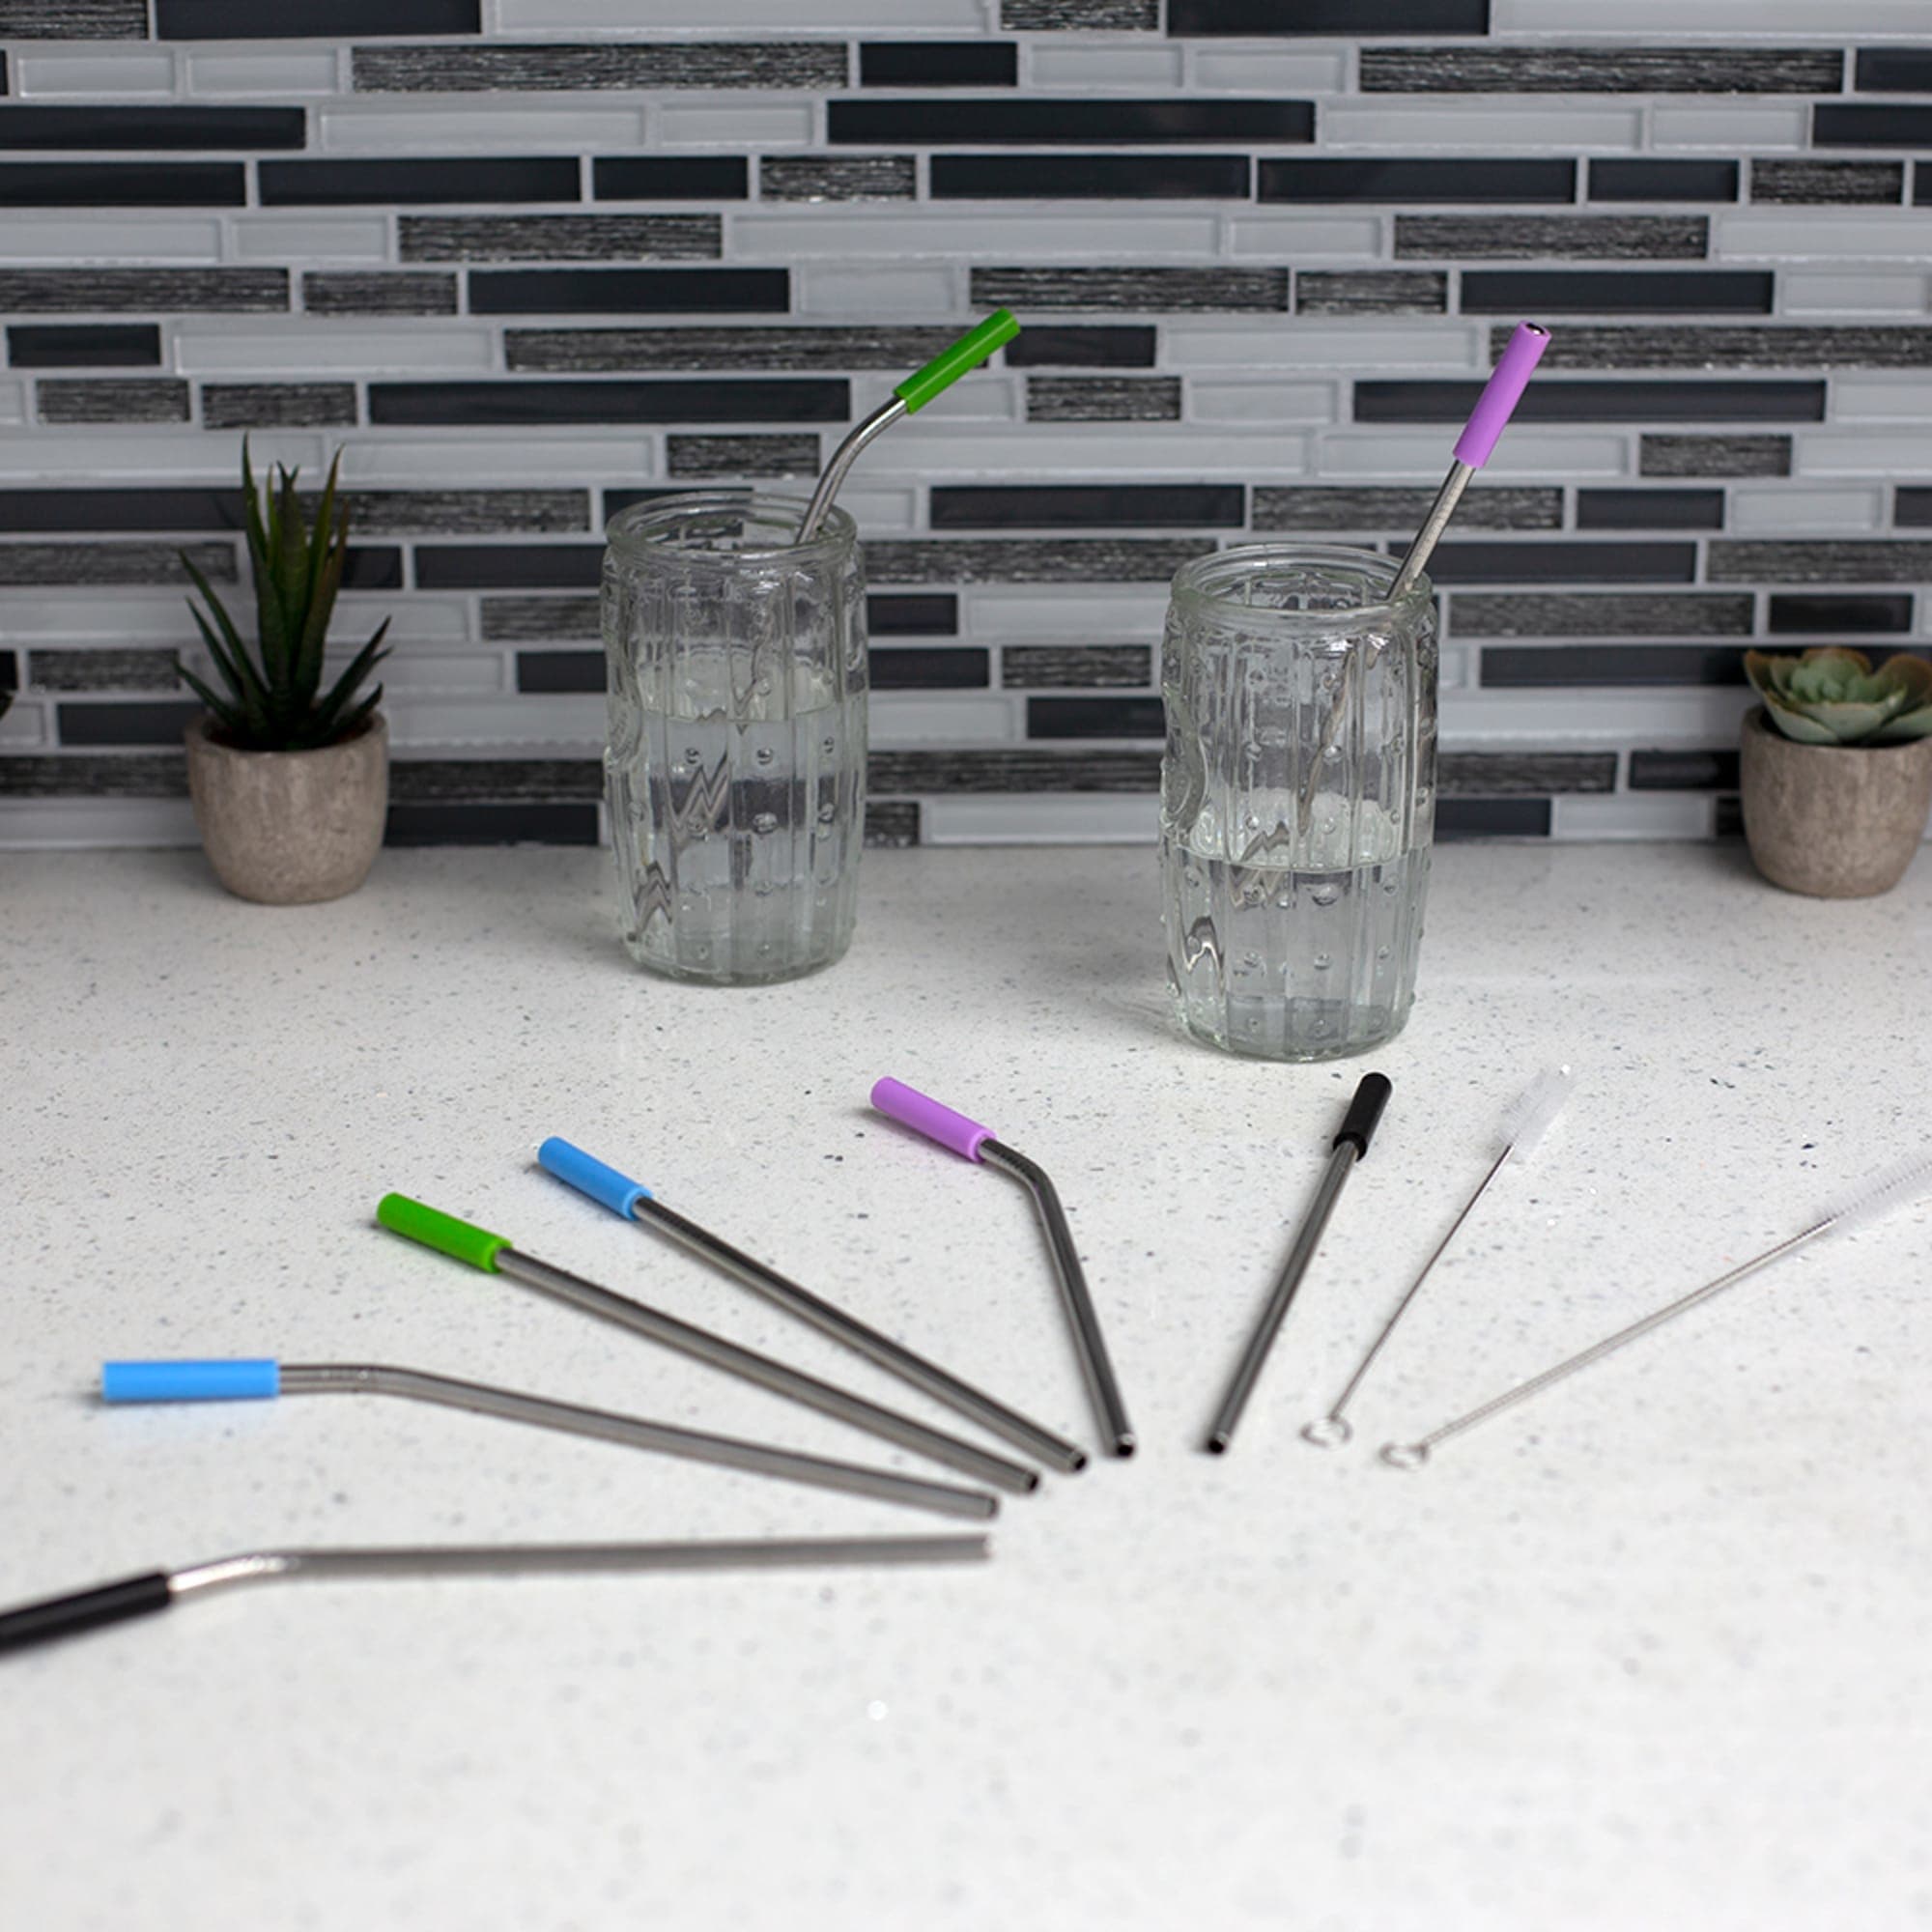 Home Basics Soft Silicone Tip Stainless Steel Straw Set, Multi-color, (Pack of 10) $4.00 EACH, CASE PACK OF 24